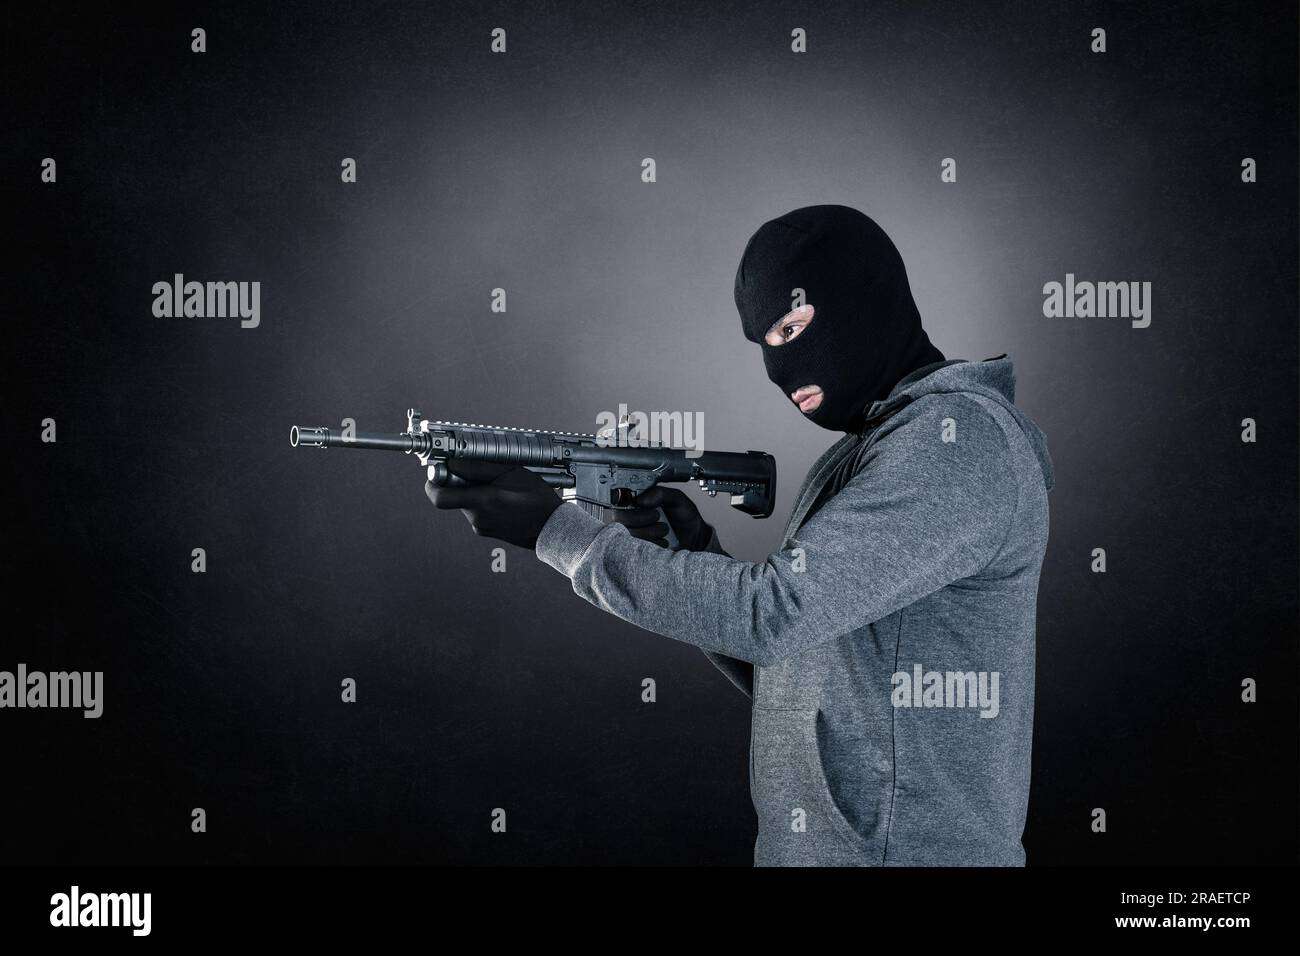 Criminal wearing black balaclava and hoodie with assault rifle over dark misty background Stock Photo